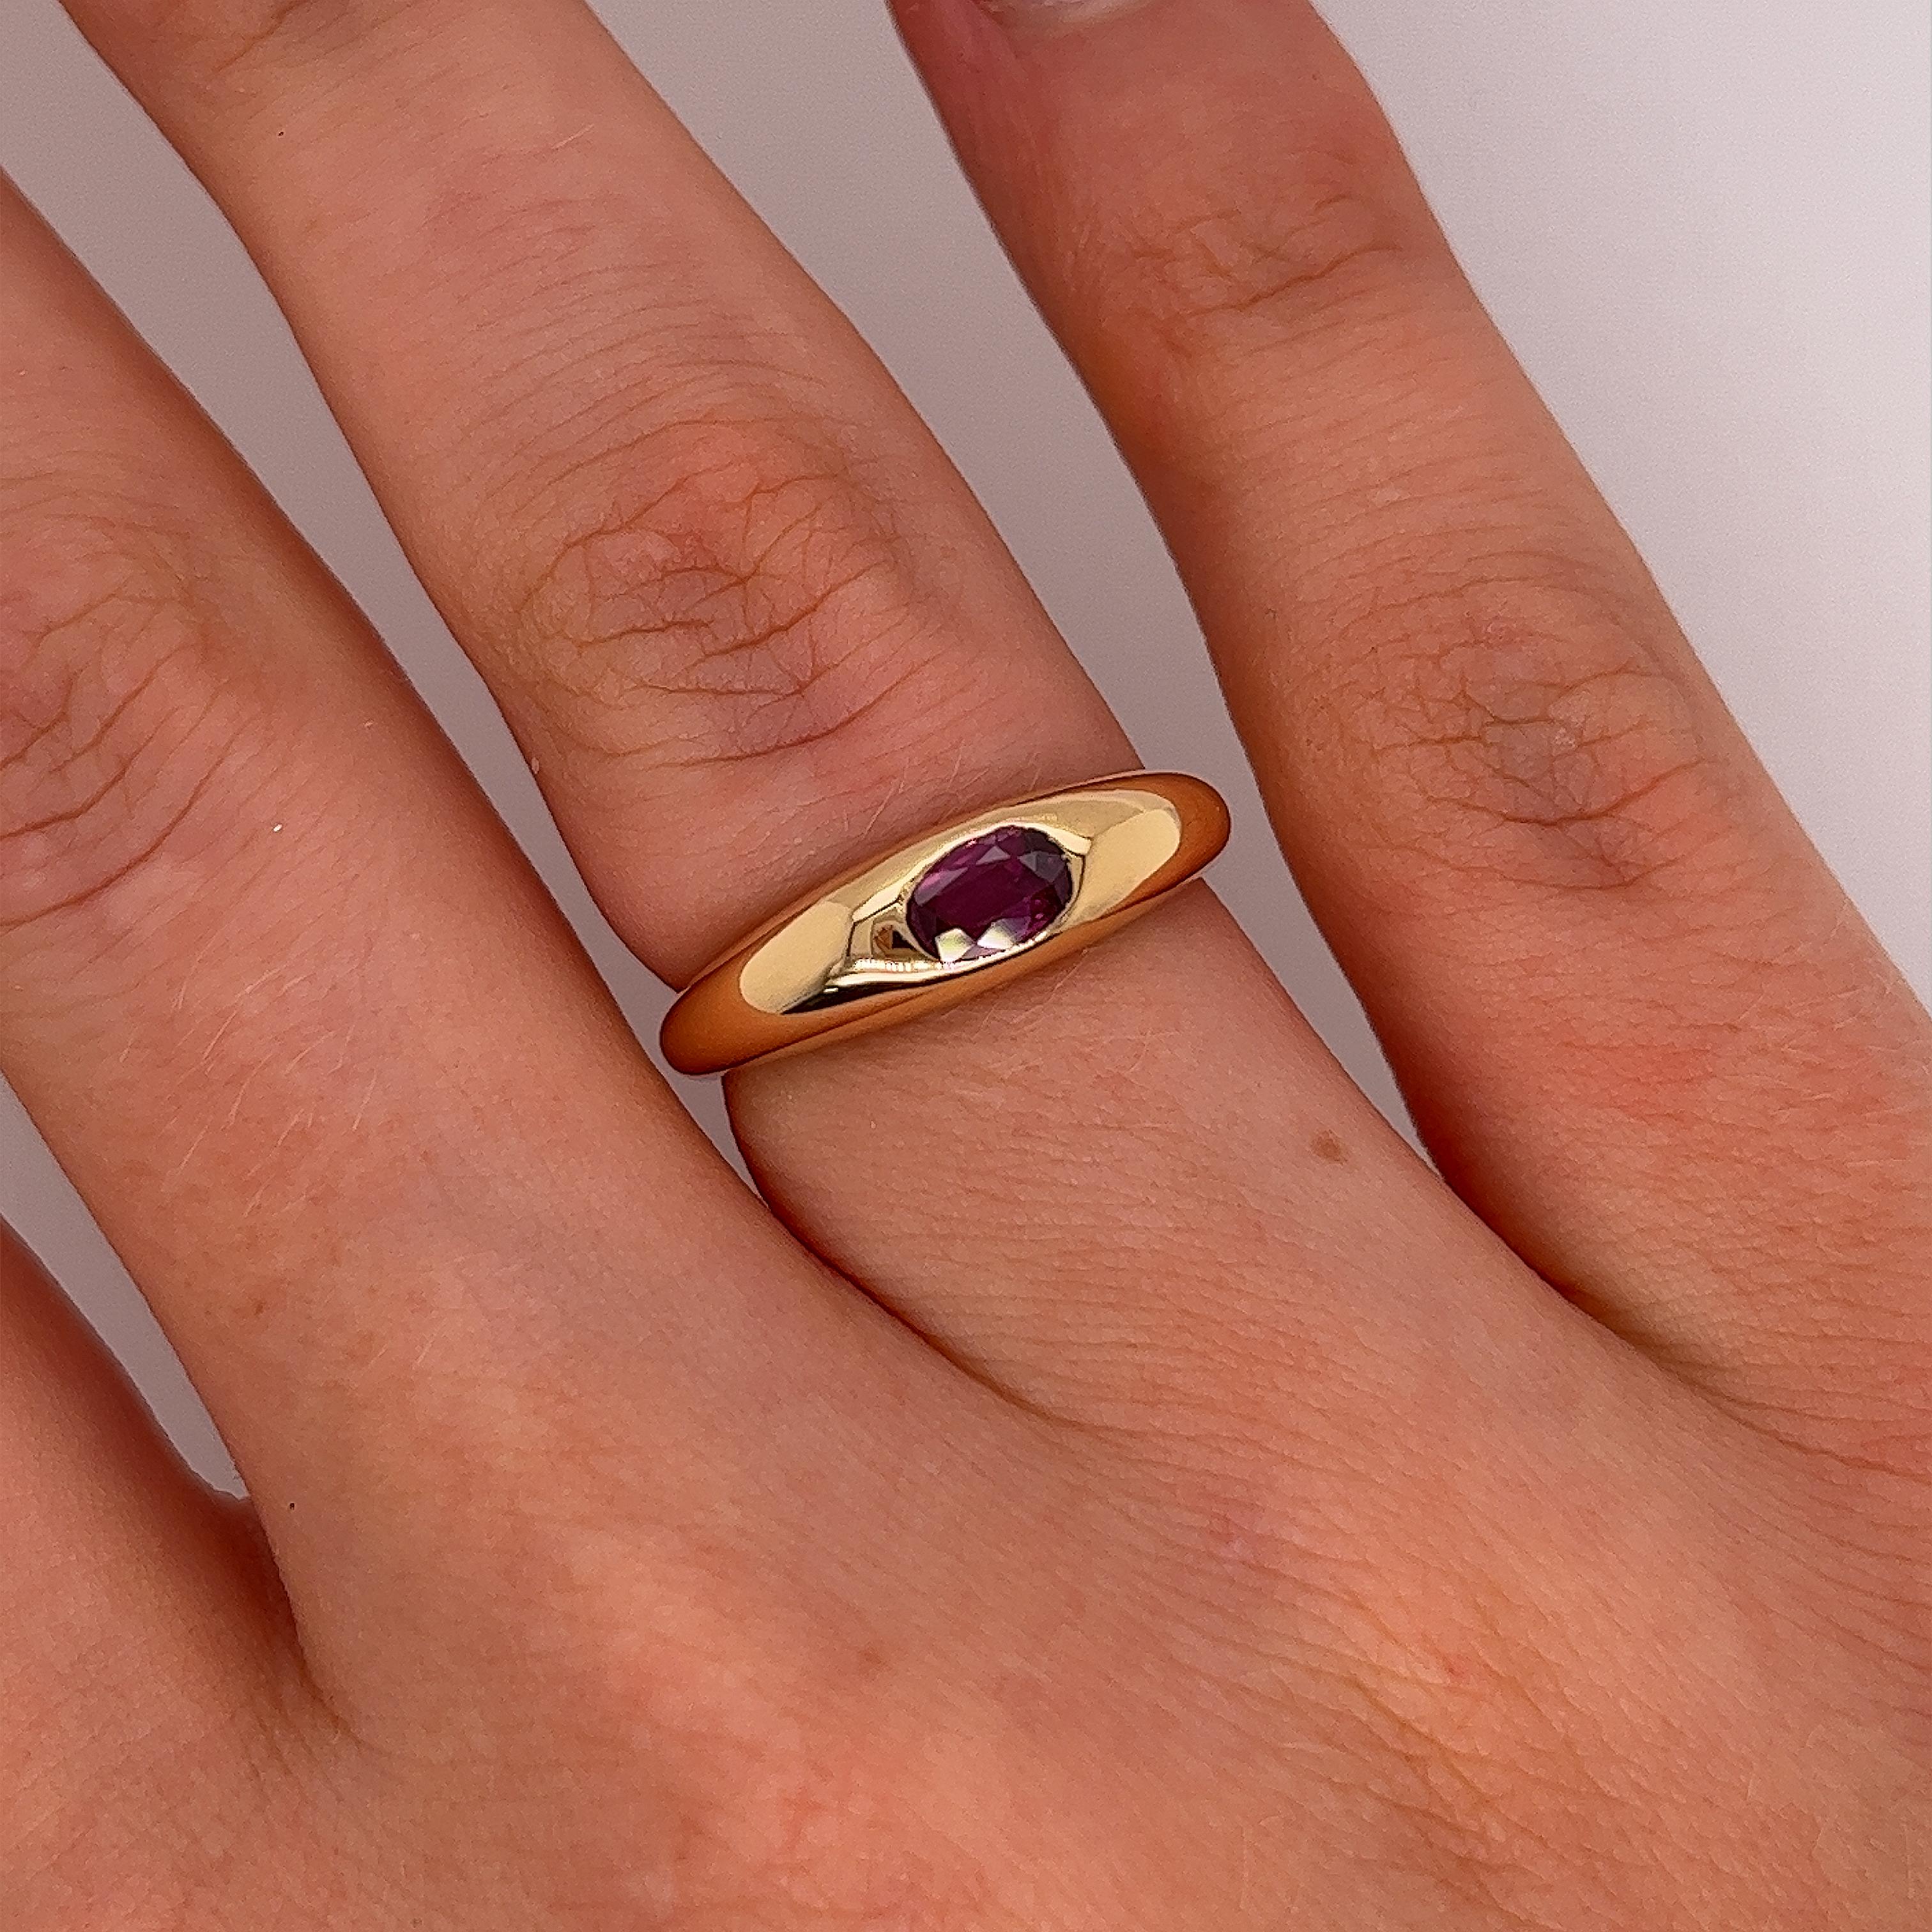 New made by Jewellery Cave 18ct yellow gold 
single stone ring, set with oval 0.40ct fine quality natural ruby,
The ring is a perfect complement to any ensemble 
and can be worn on any occasion.
Total Ruby Weight: 0.40ct 
Total  Weight: 5.5g
Ring